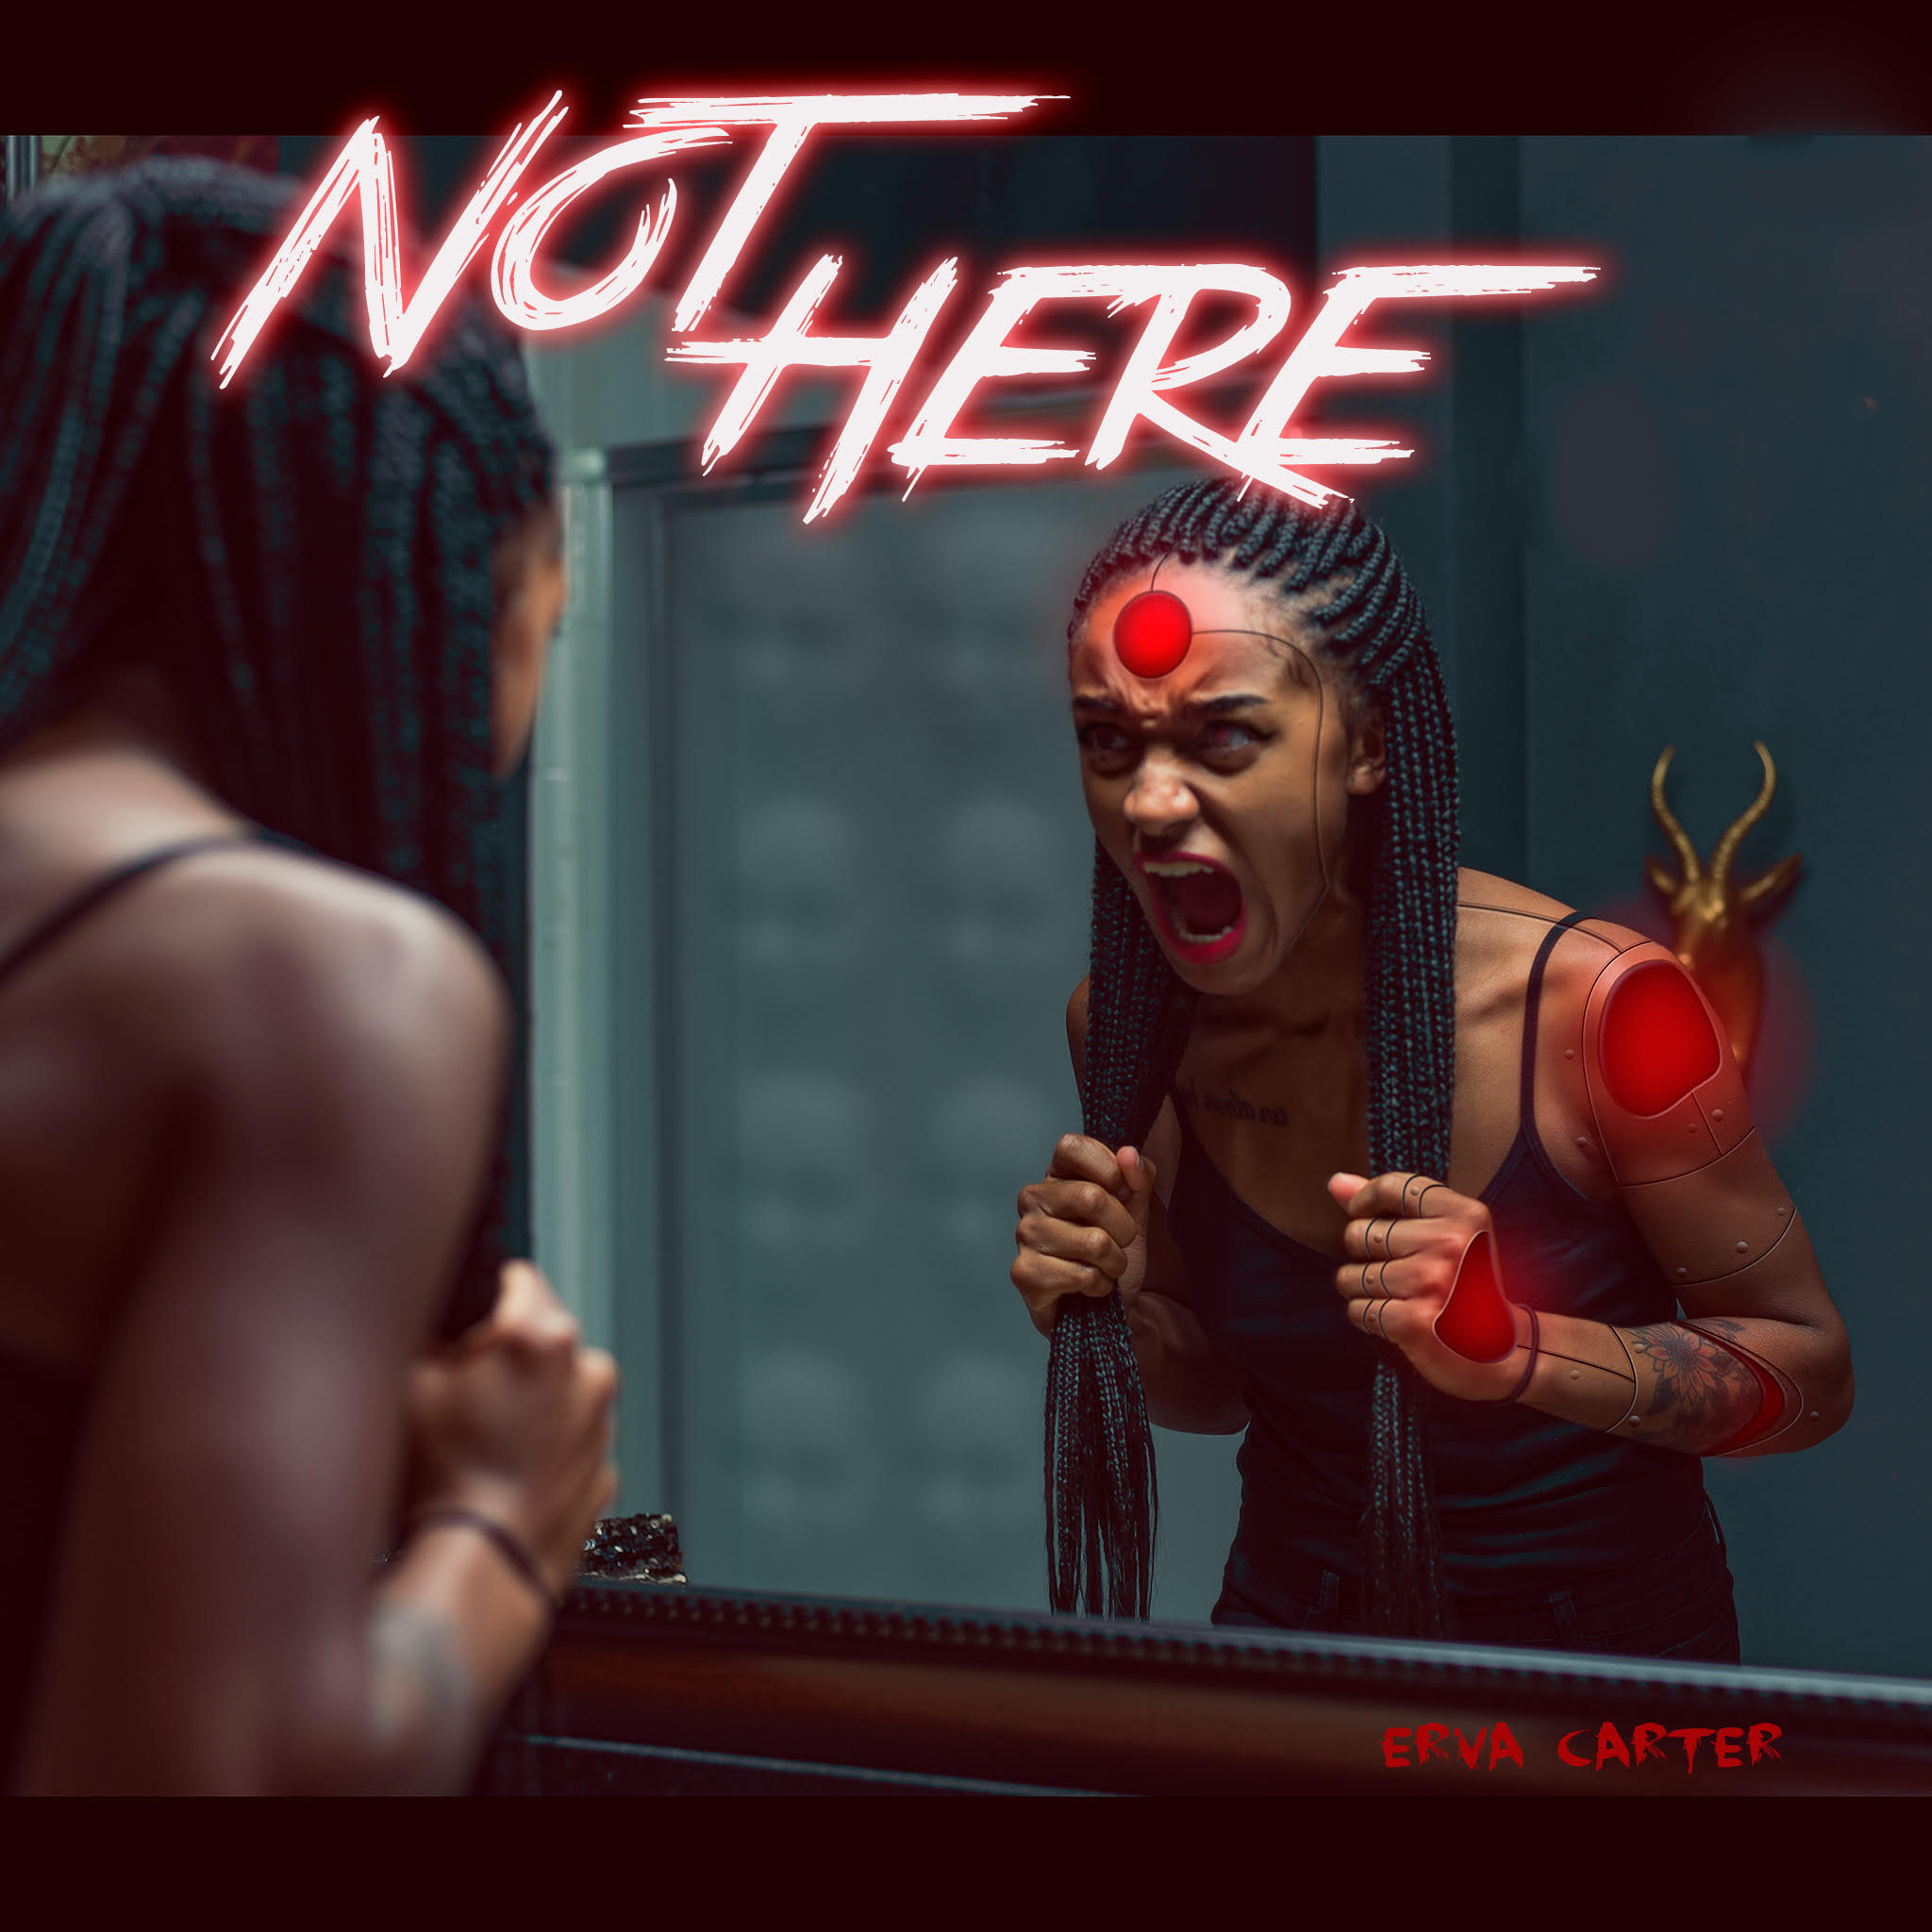 Erva Carter – “Not Here” – produced by Analogue Escape